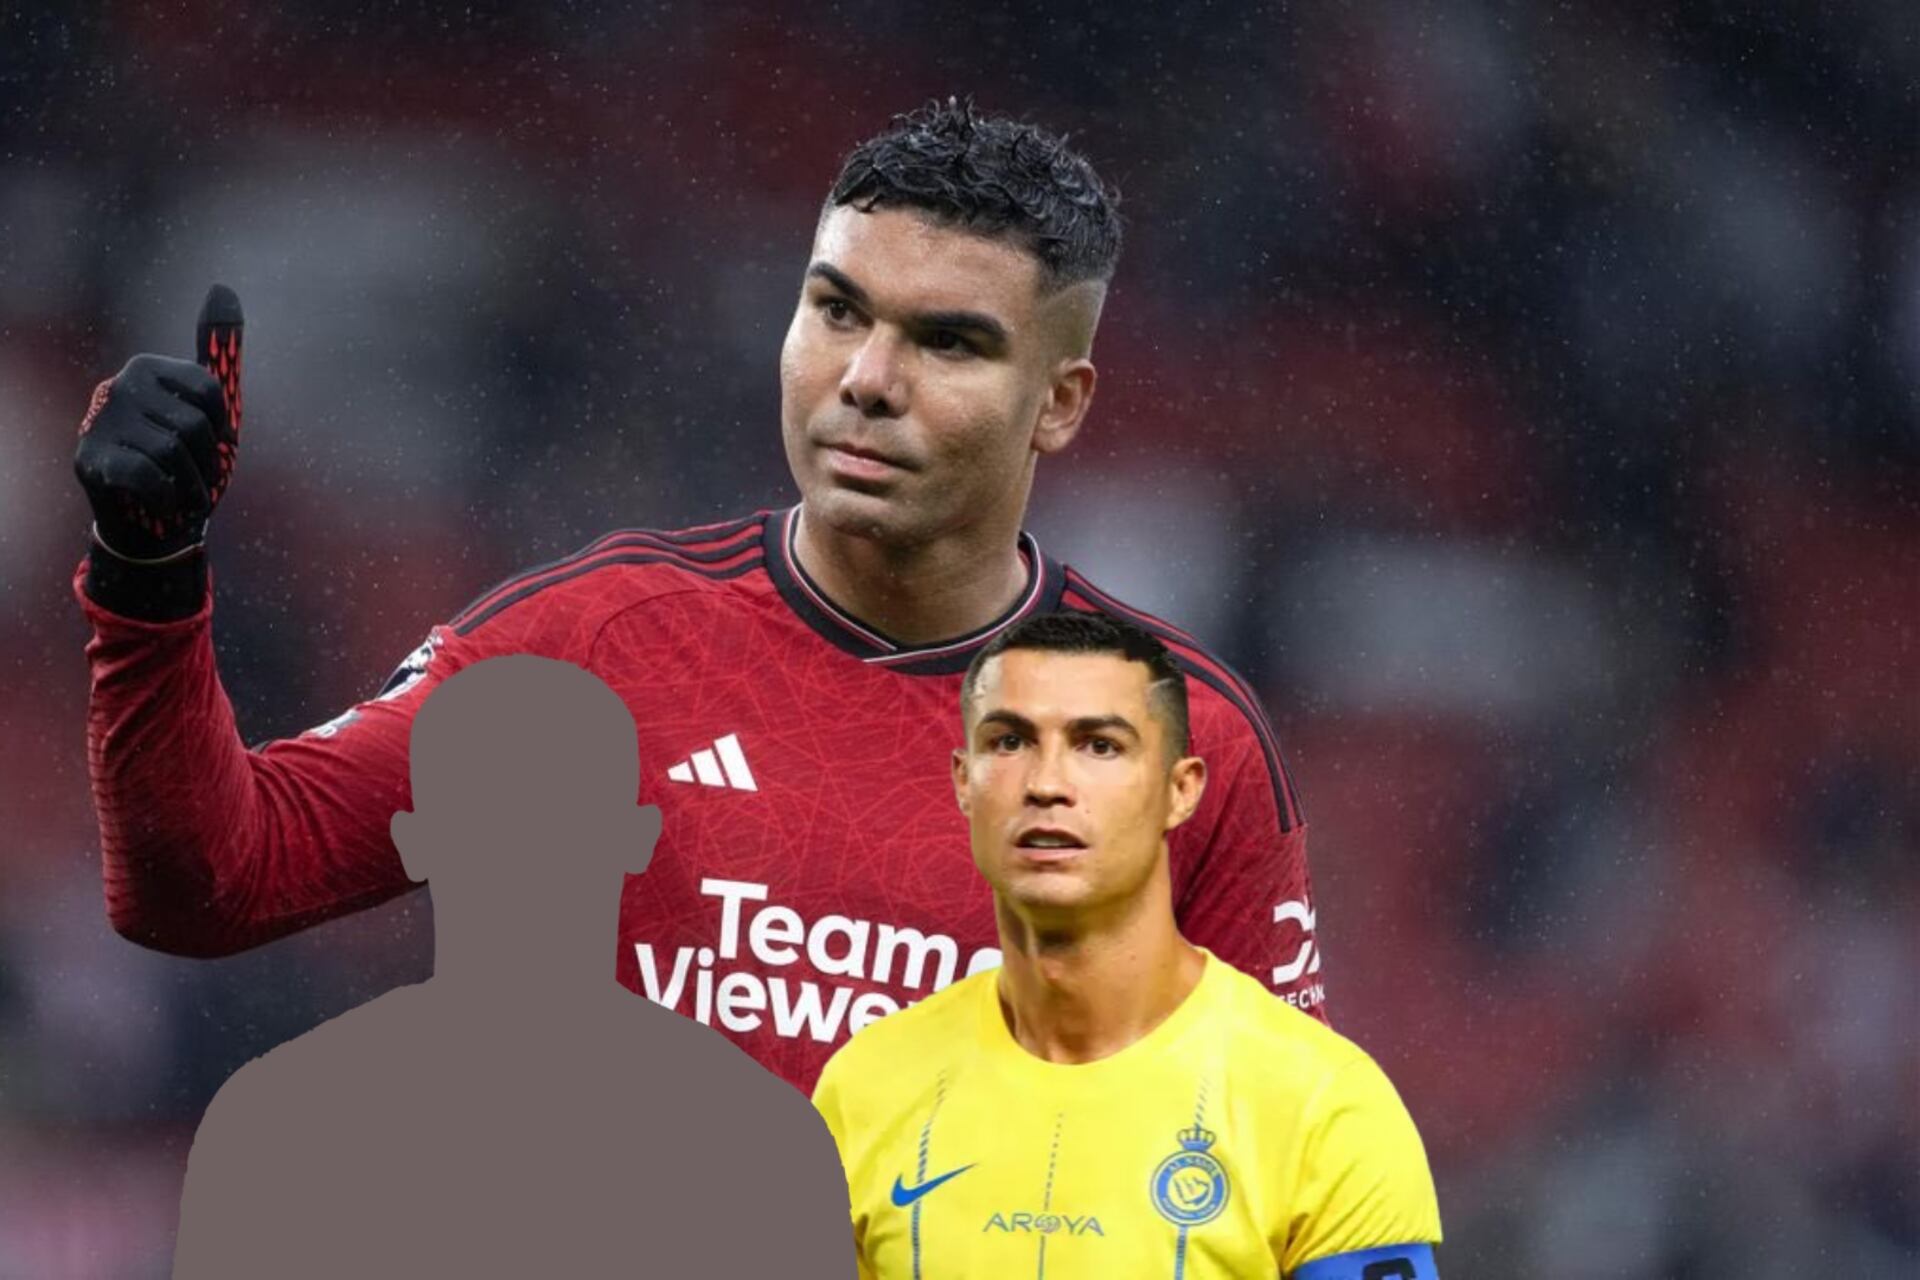 Manchester United already has Casemiro's replacement if he decides to go to Arabia to play with Cristiano